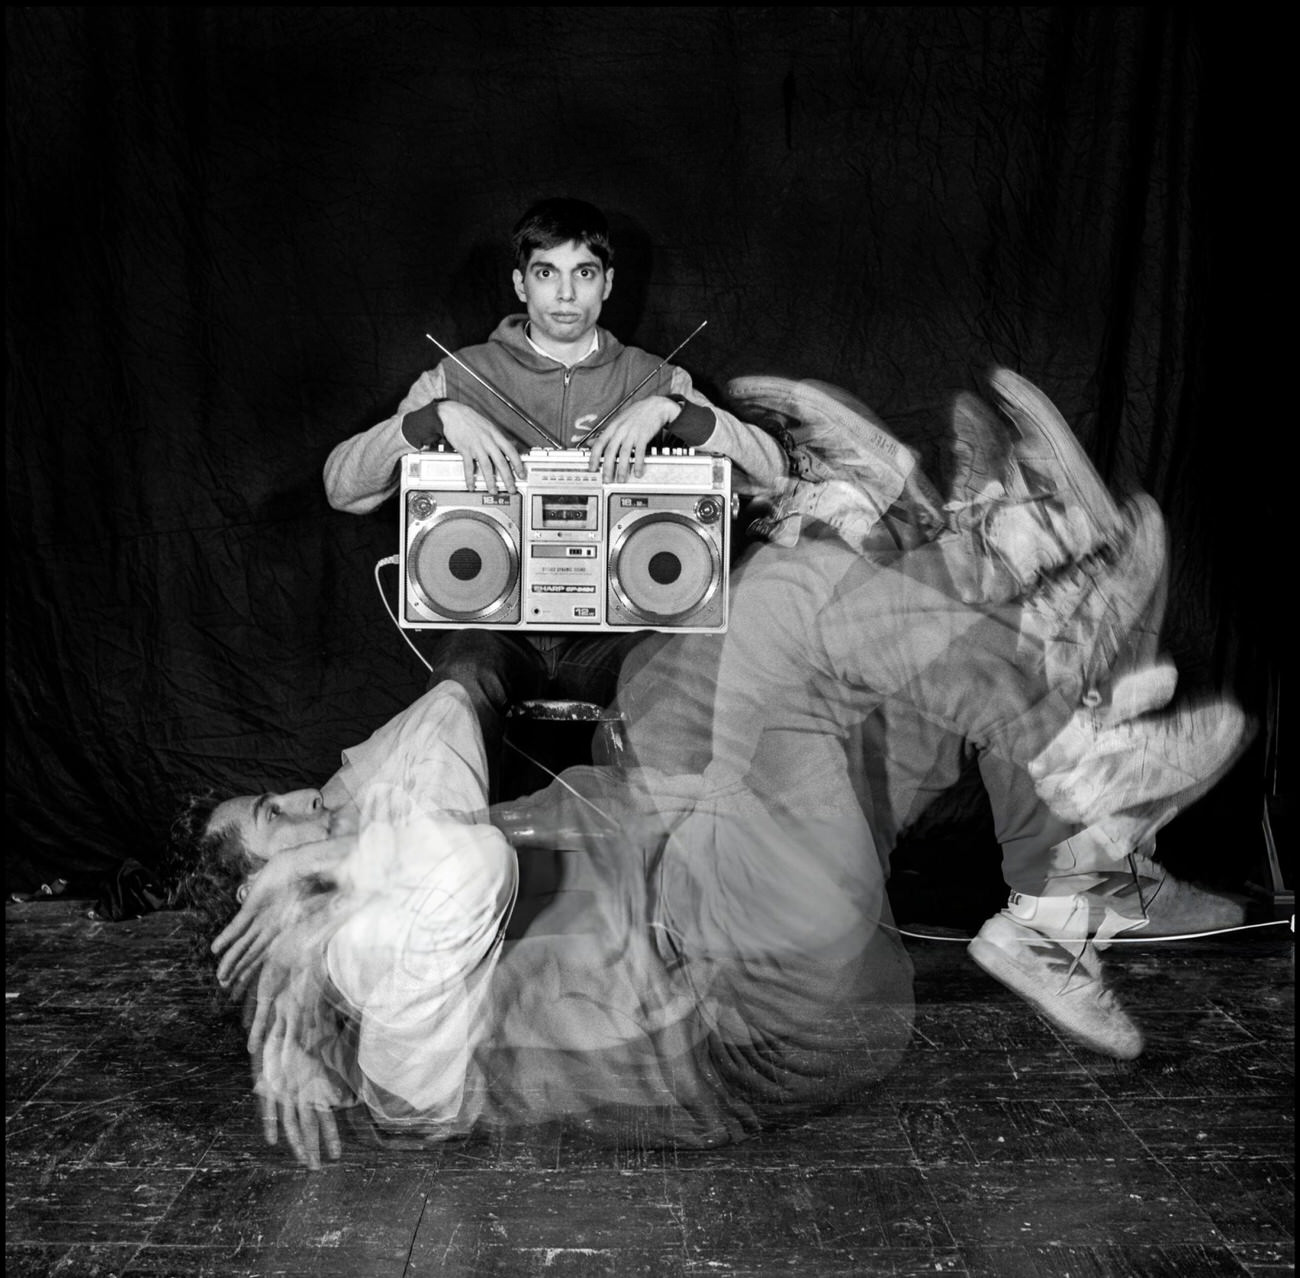 Members Of The Soul Sonic Rockers With A Boombox, A Breakdance Team From New York City, 1983.